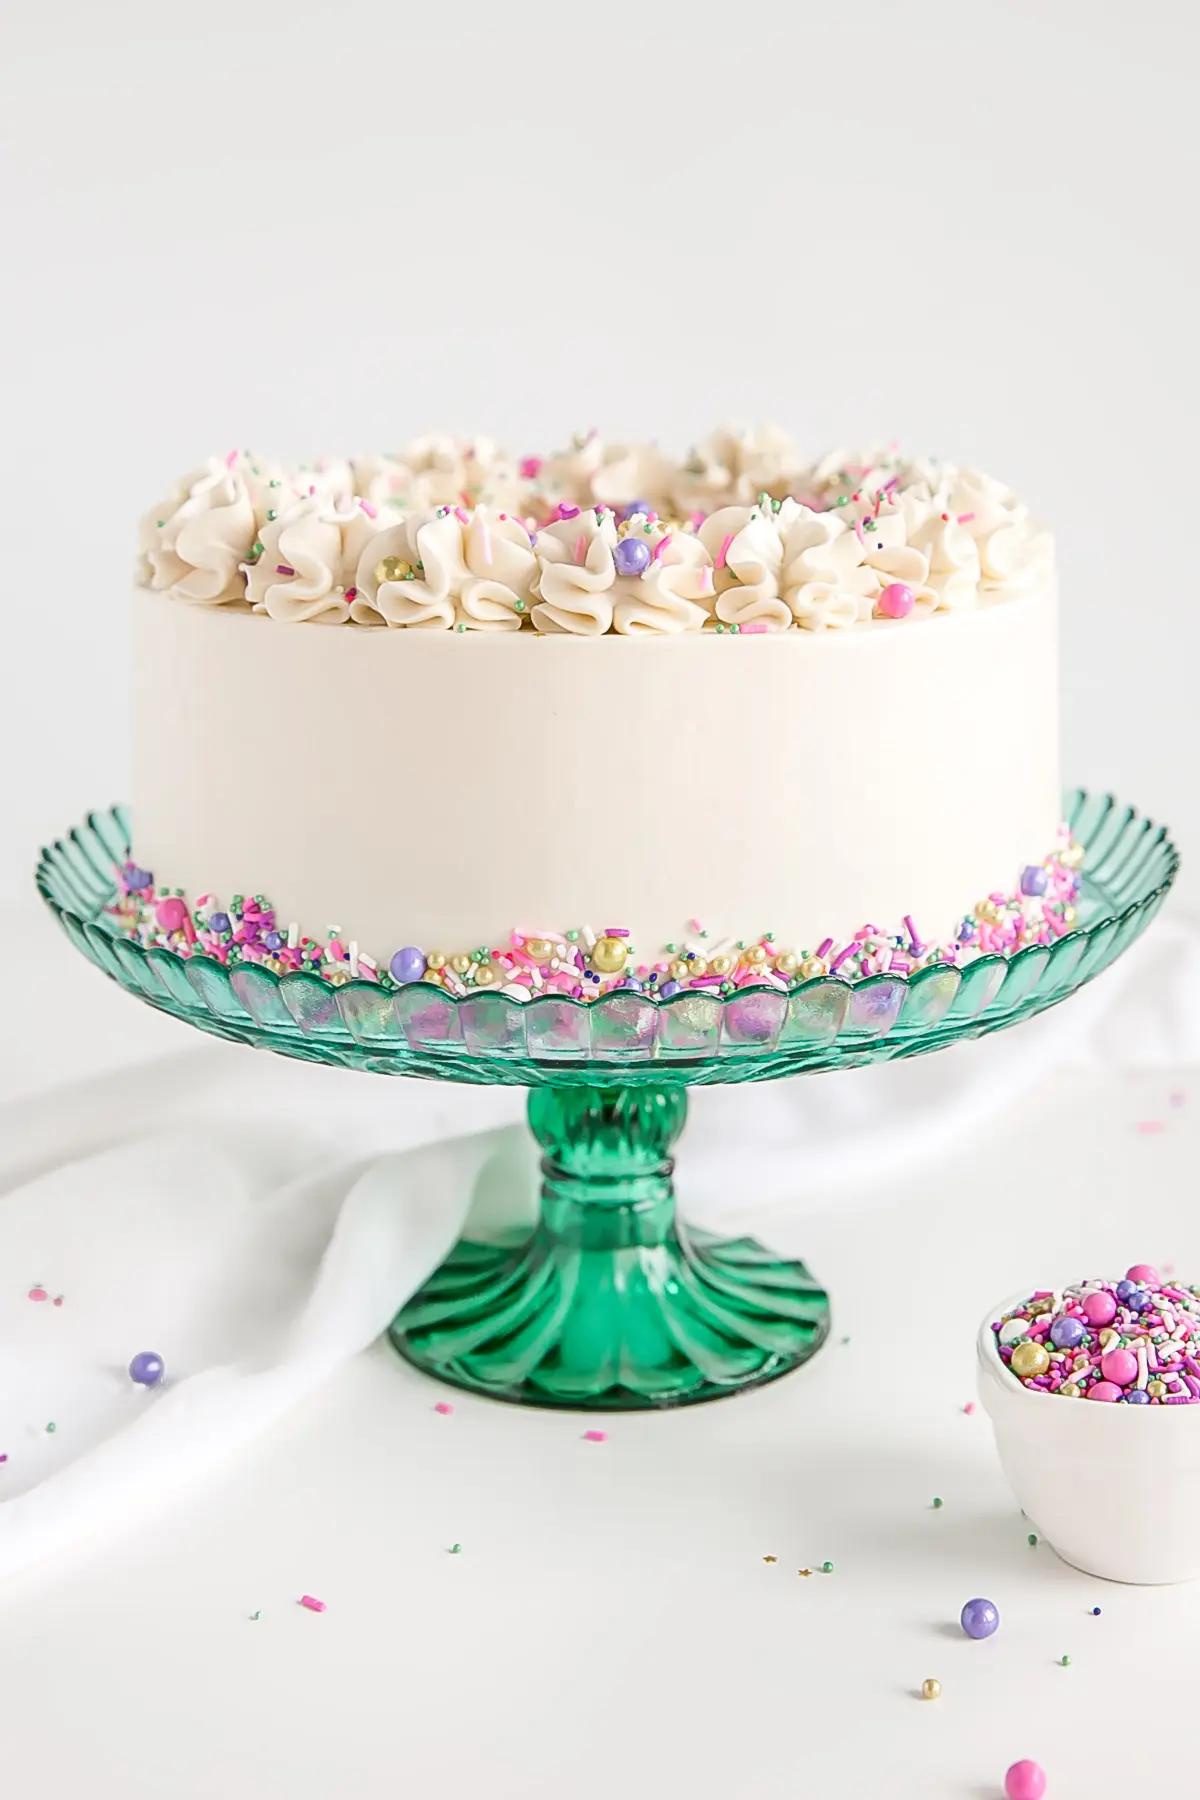 White cake recipe with white Swiss meringue buttercream and sprinkles.